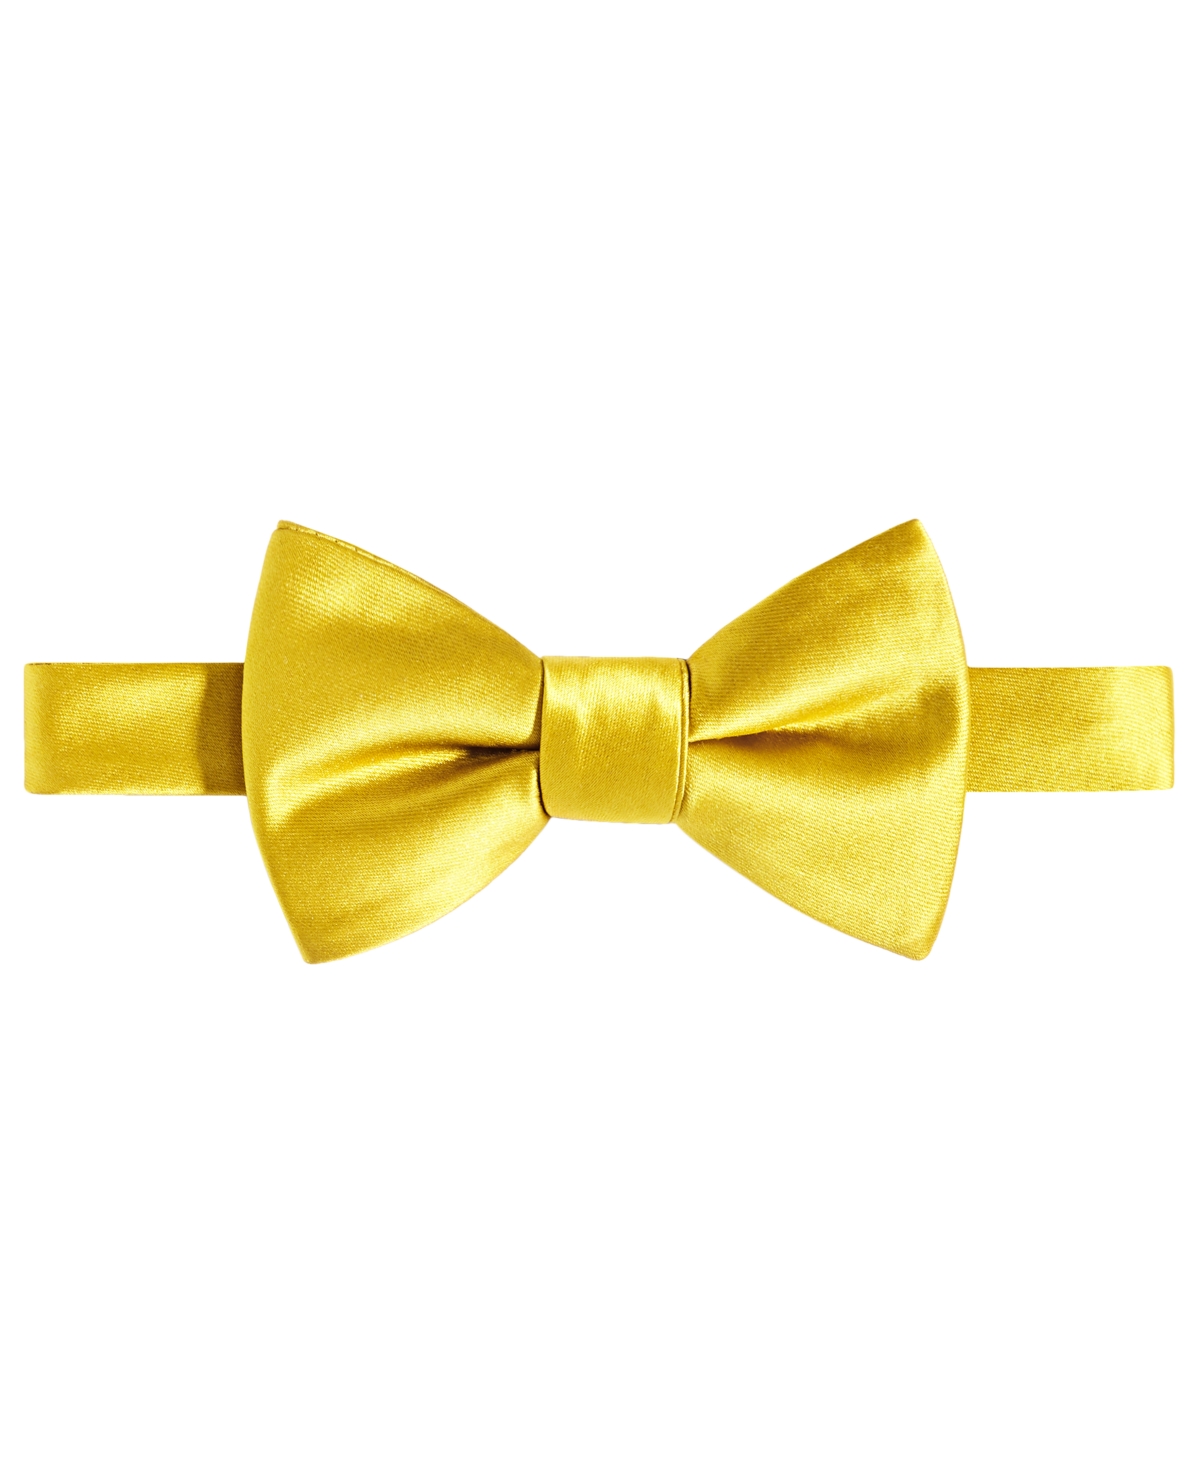 Men's Black & Gold Solid Bow Tie - Gold